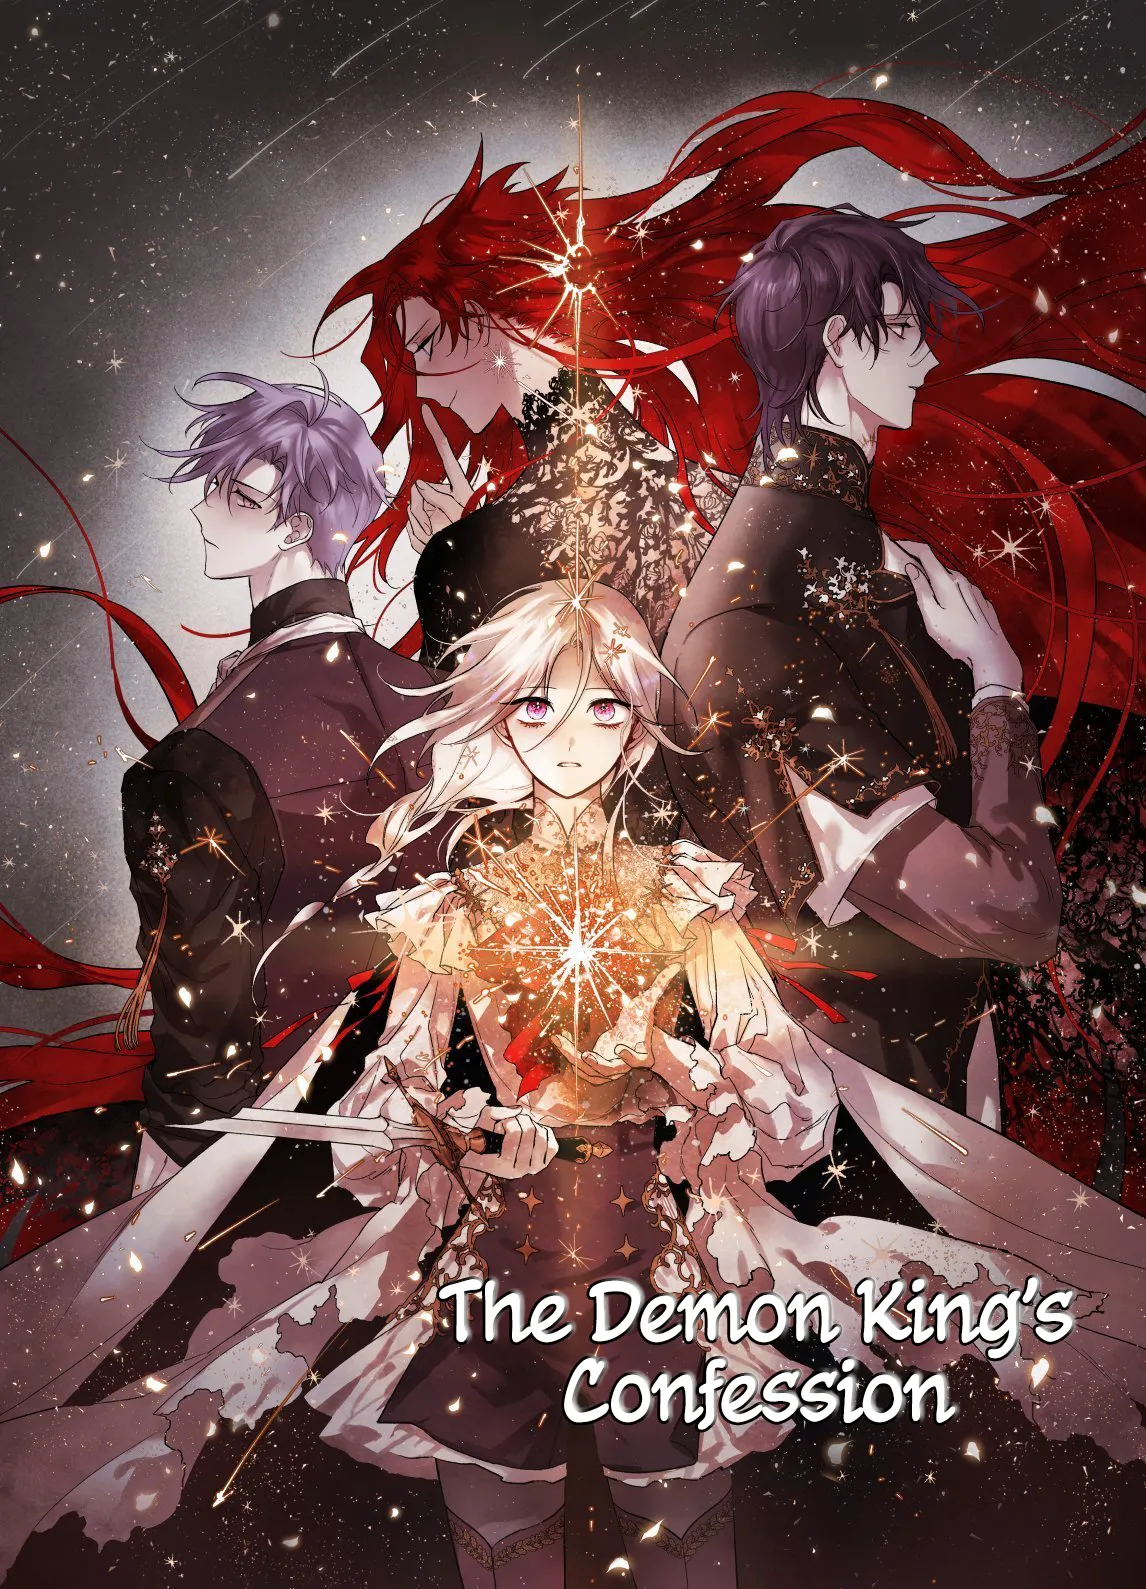 The Demon King's Confession